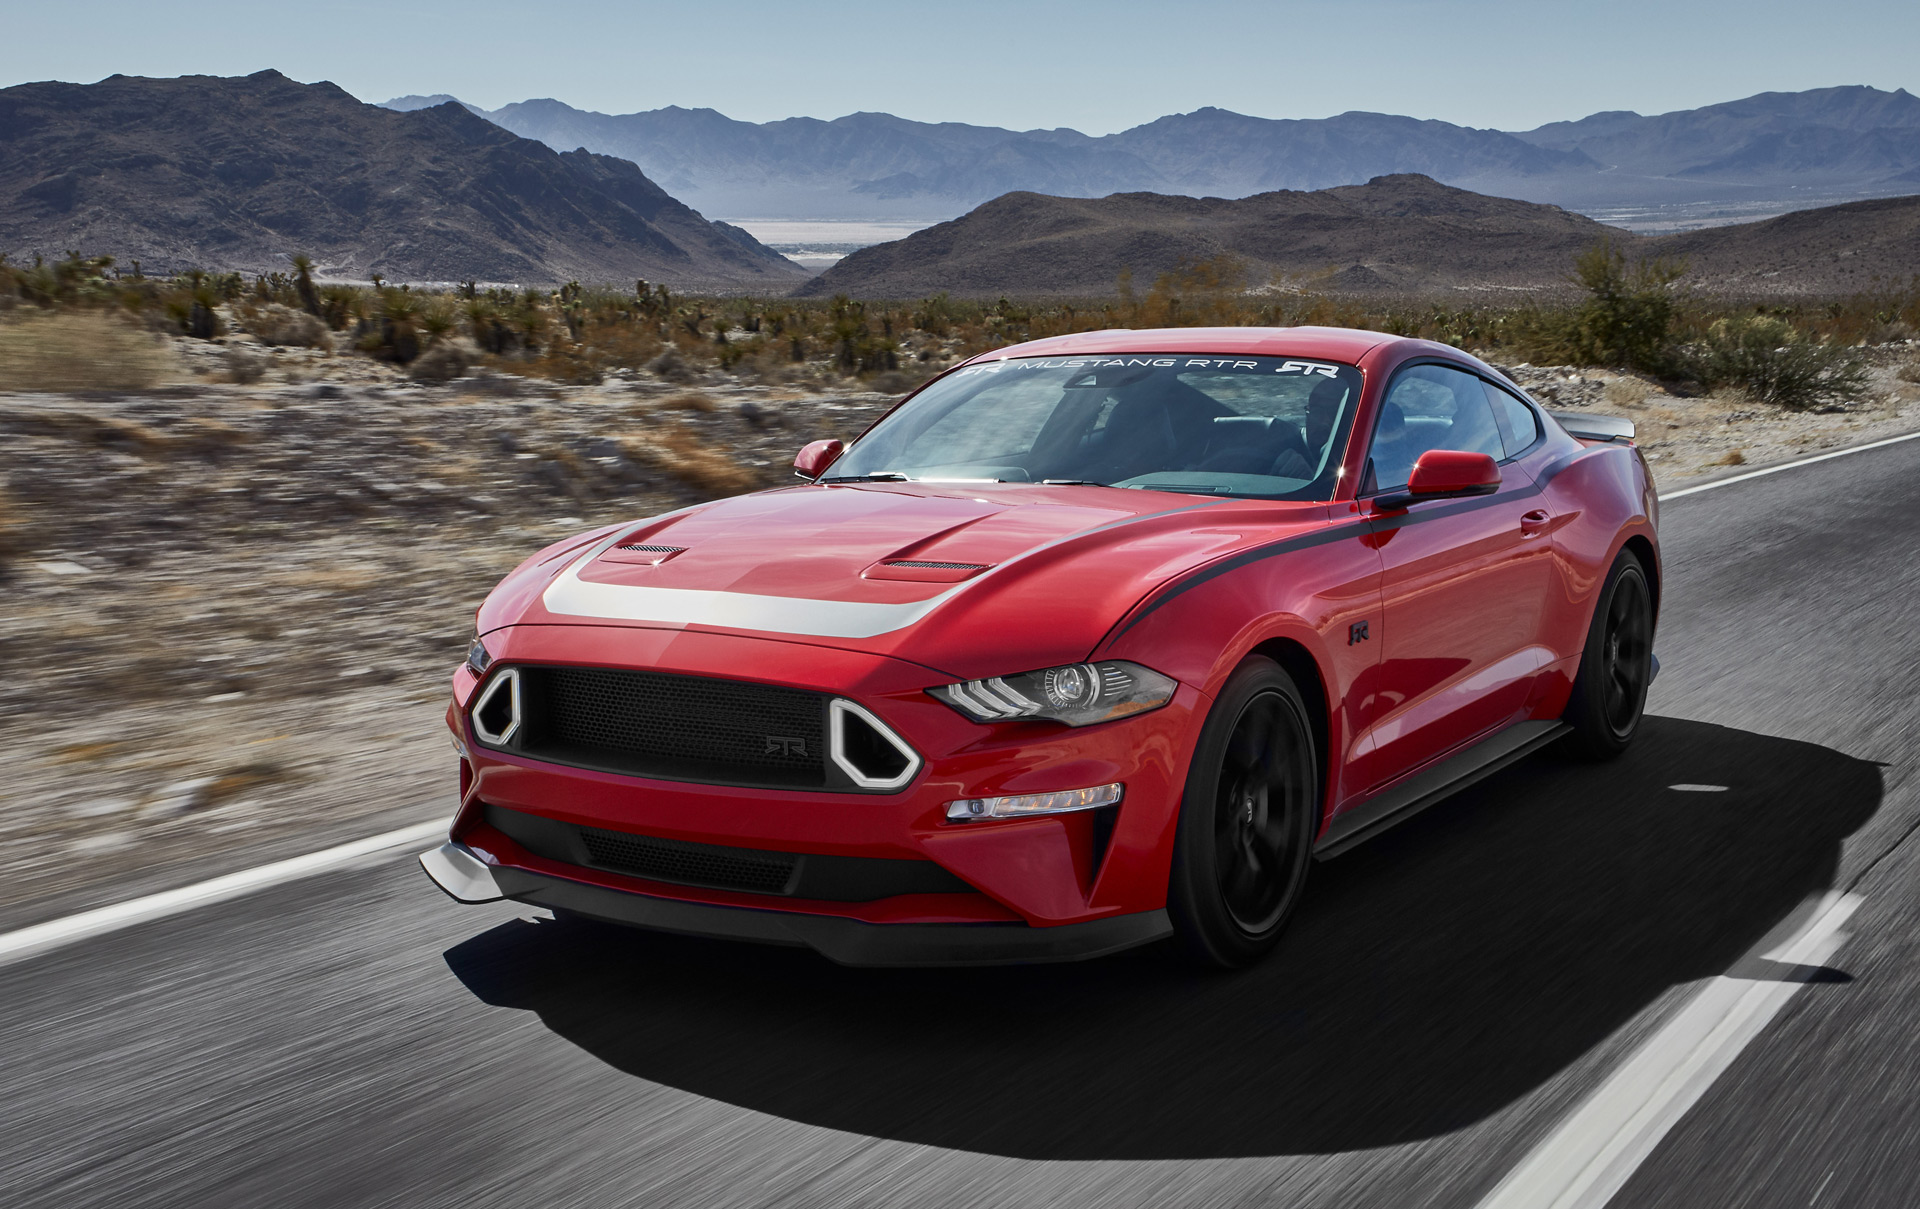 Ford and RTR Vehicles collaborate on Series 1 Mustang